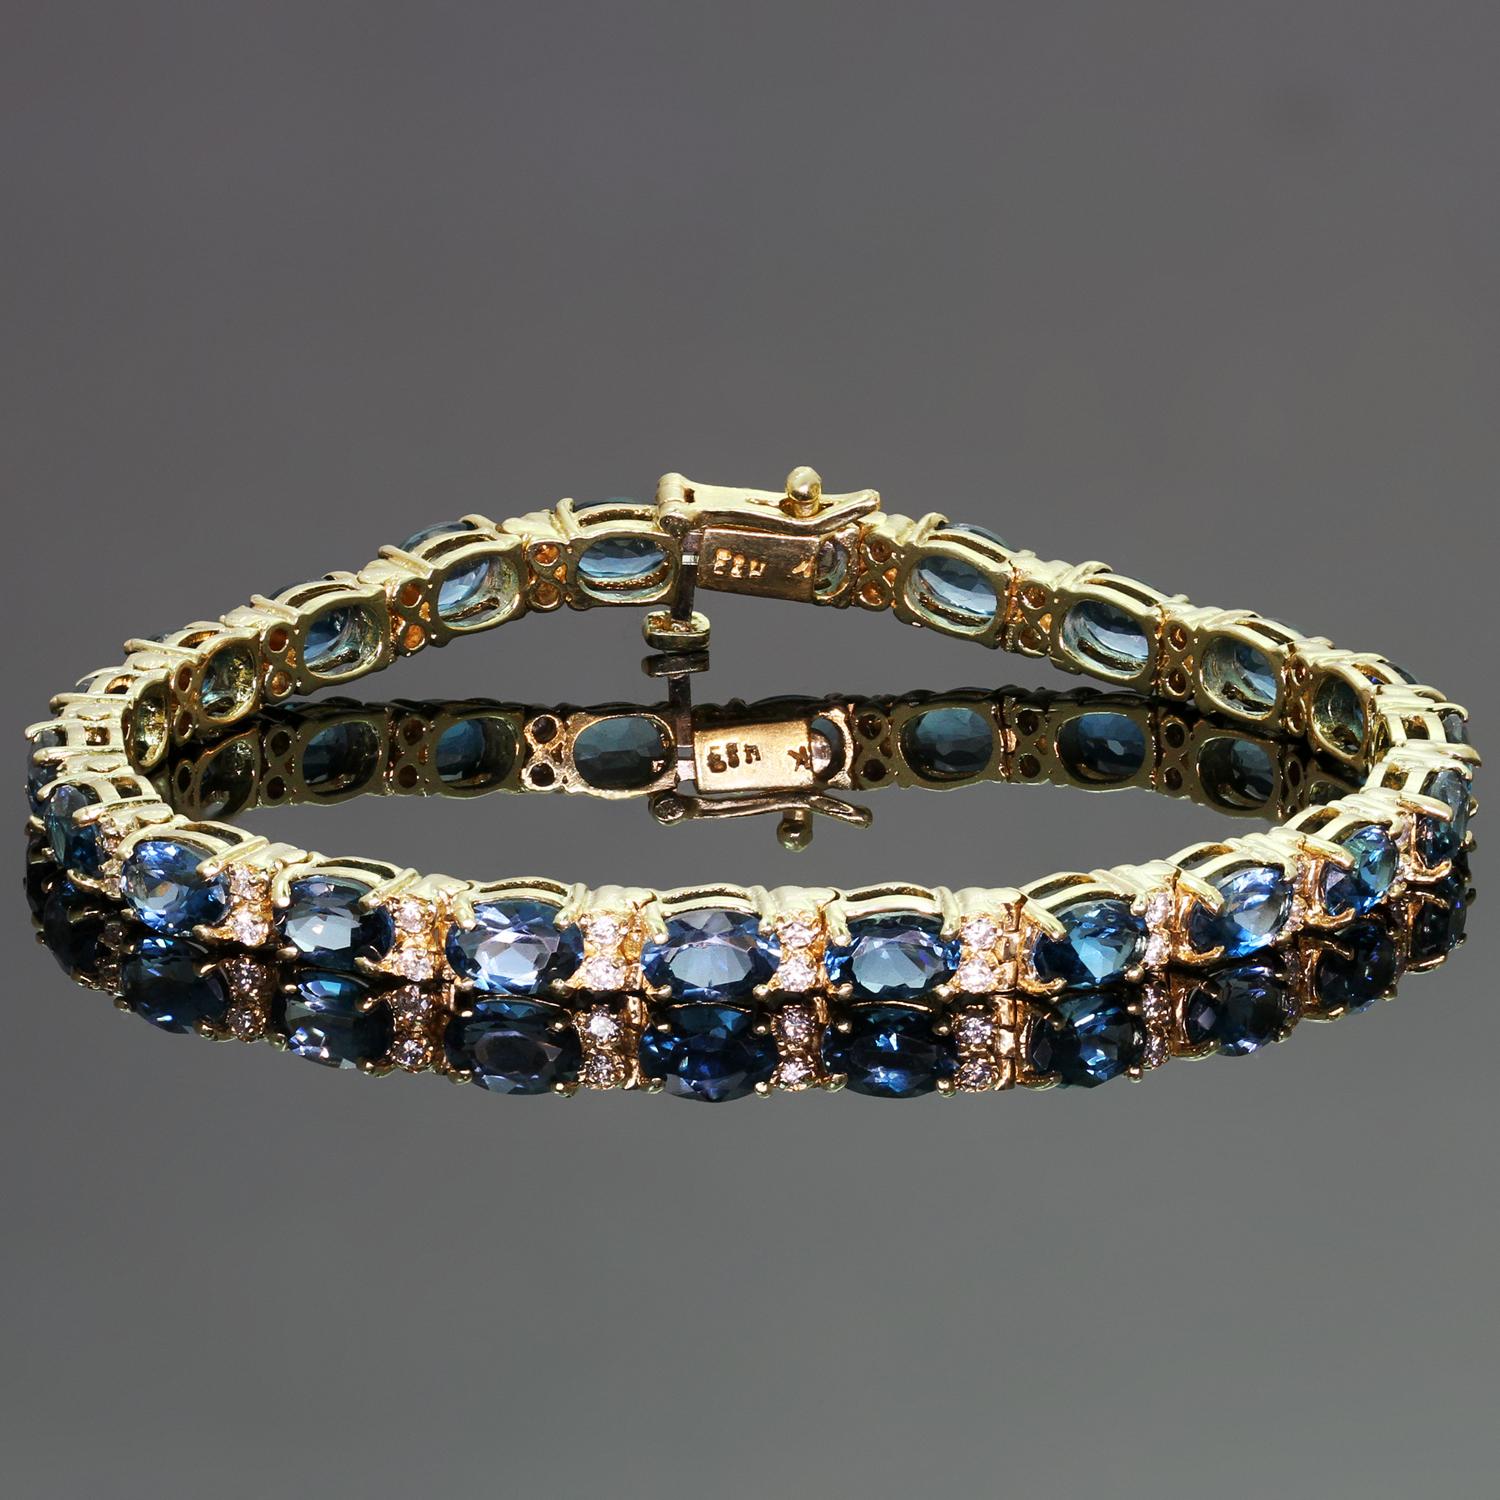 This gorgeous oval link bracelet is crafted in 14k yellow gold and set with blue topaz stones weighing an estimated 11.00 carats and brilliant-cut round diamonds weighing an estimated 0.88 carats. Made in United States circa 1990s. Measurements: